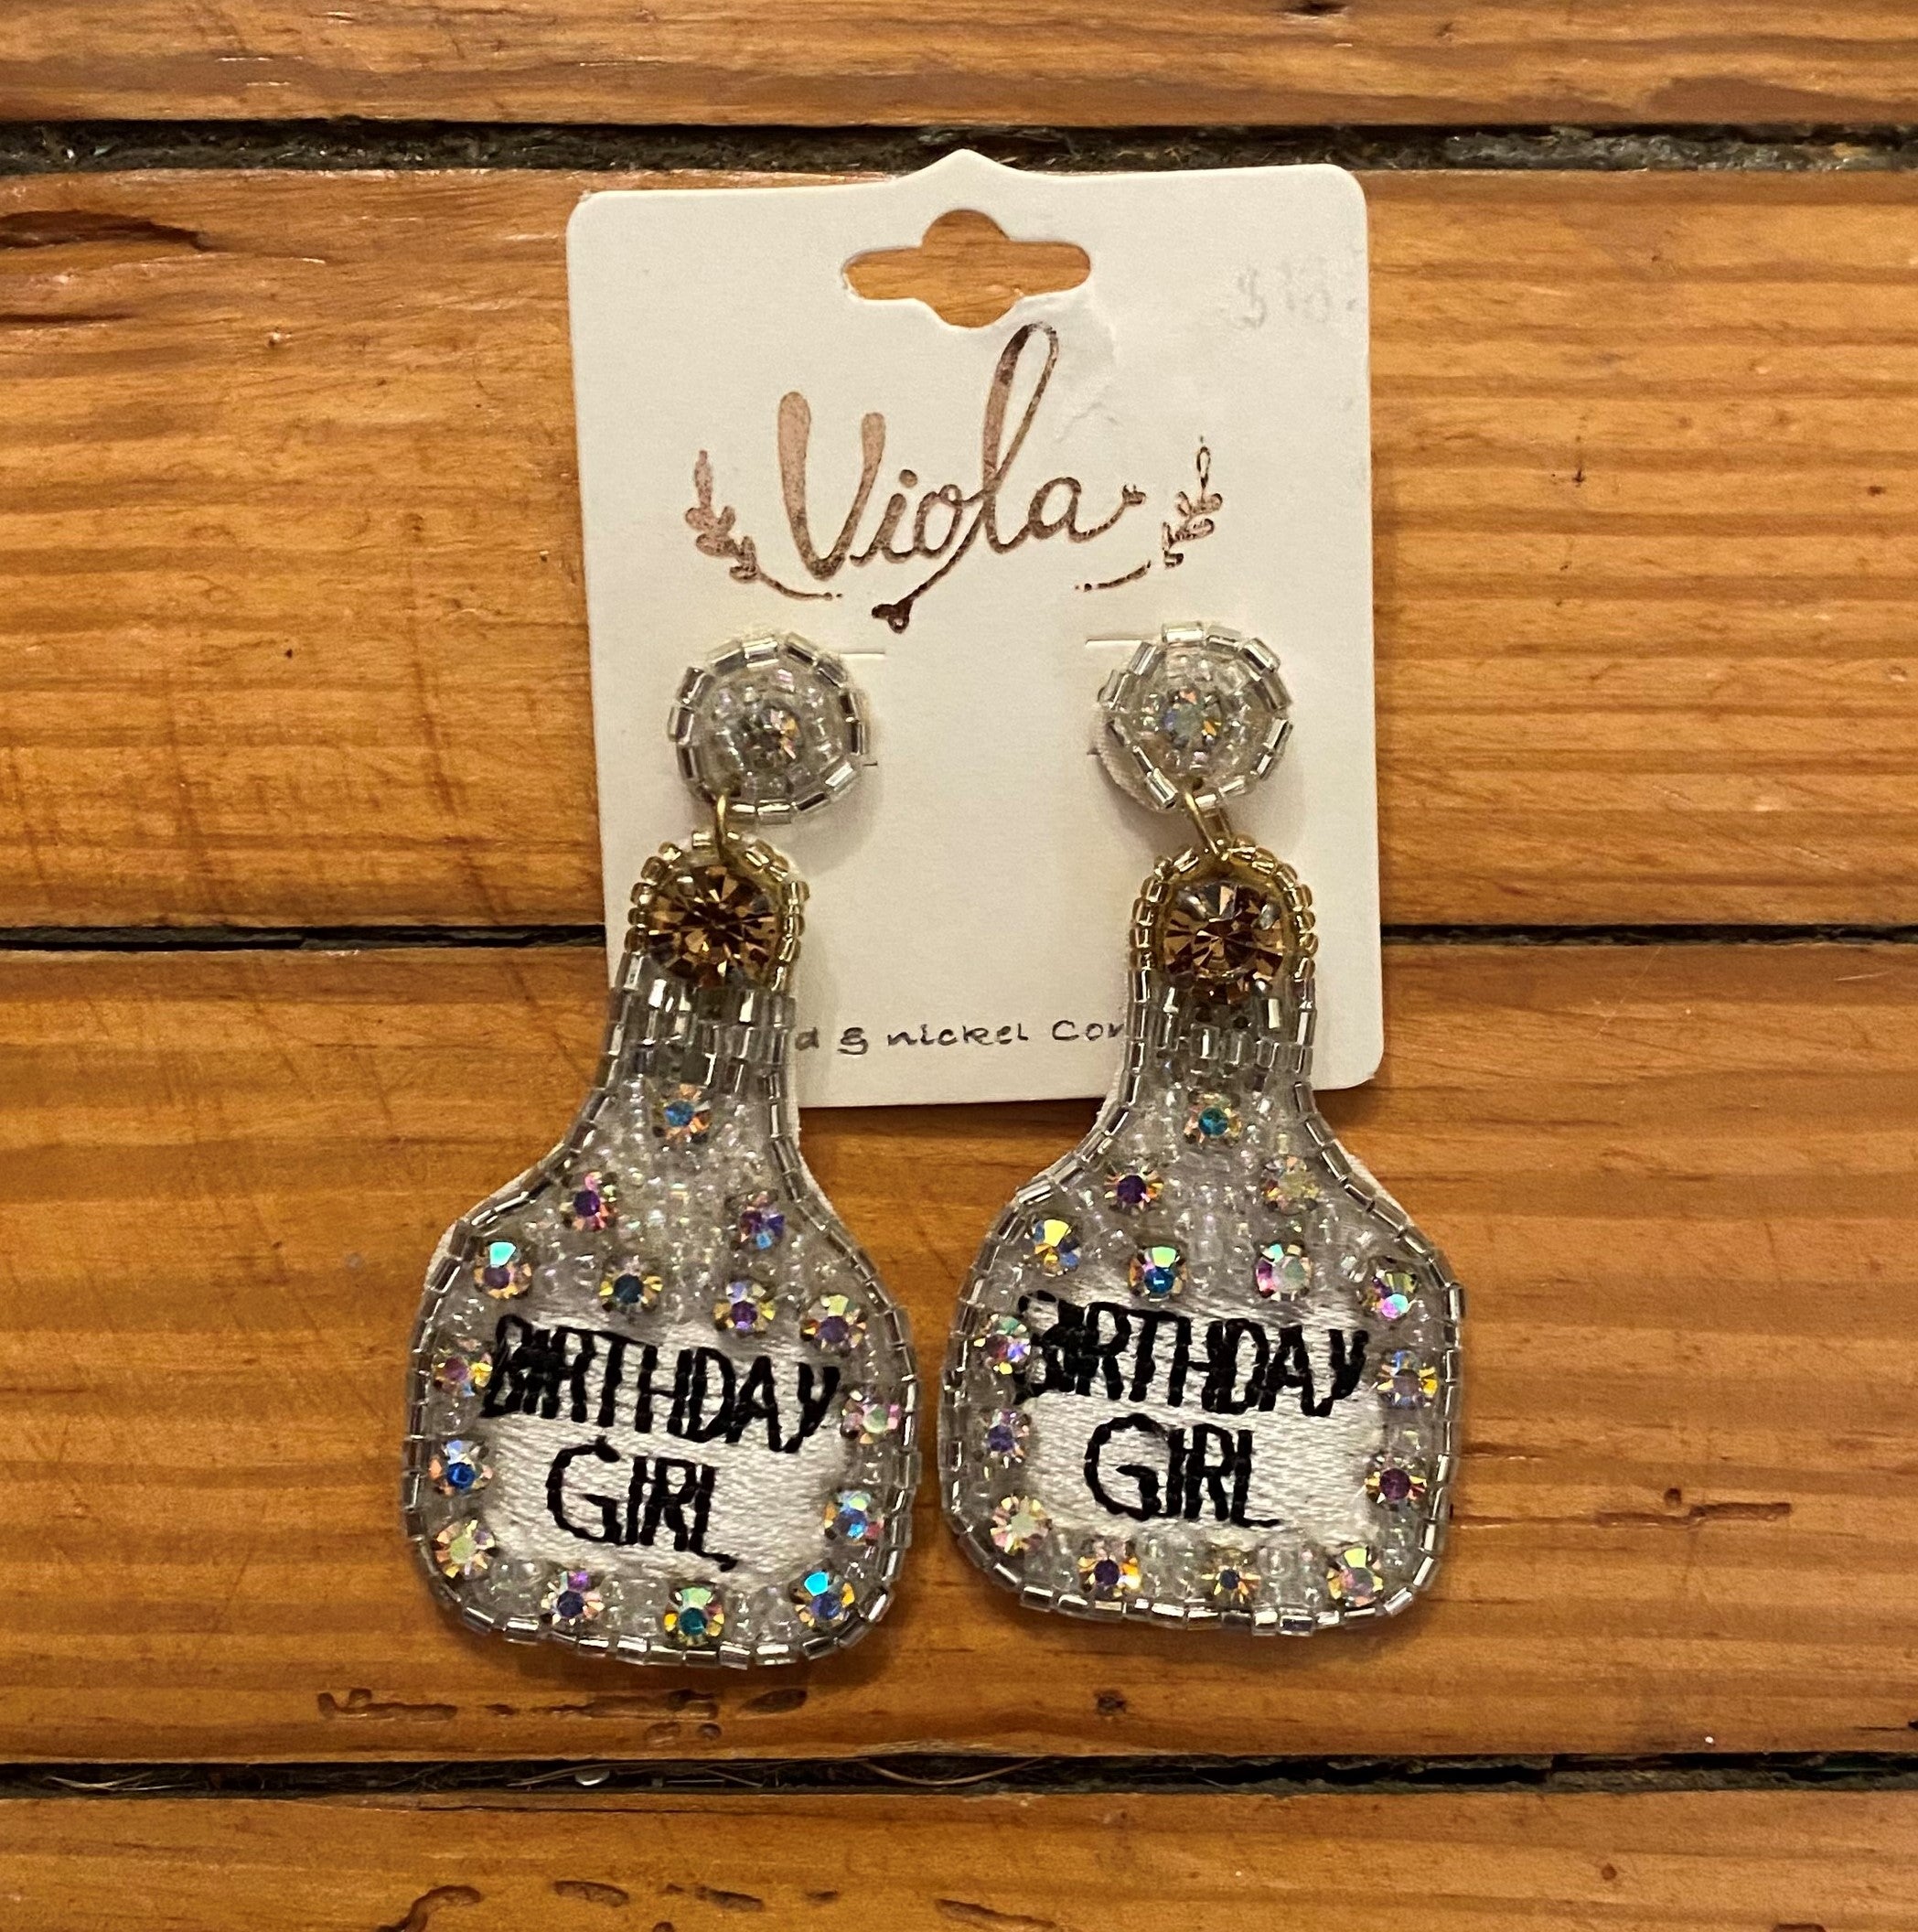 These "BIRTHDAY GIRL" beaded earrings are perfect for their special occasion. Crafted with silver beads and adorned with the words "Birthday Girl," these post earrings are the perfect touch for the birthday girl's special day!